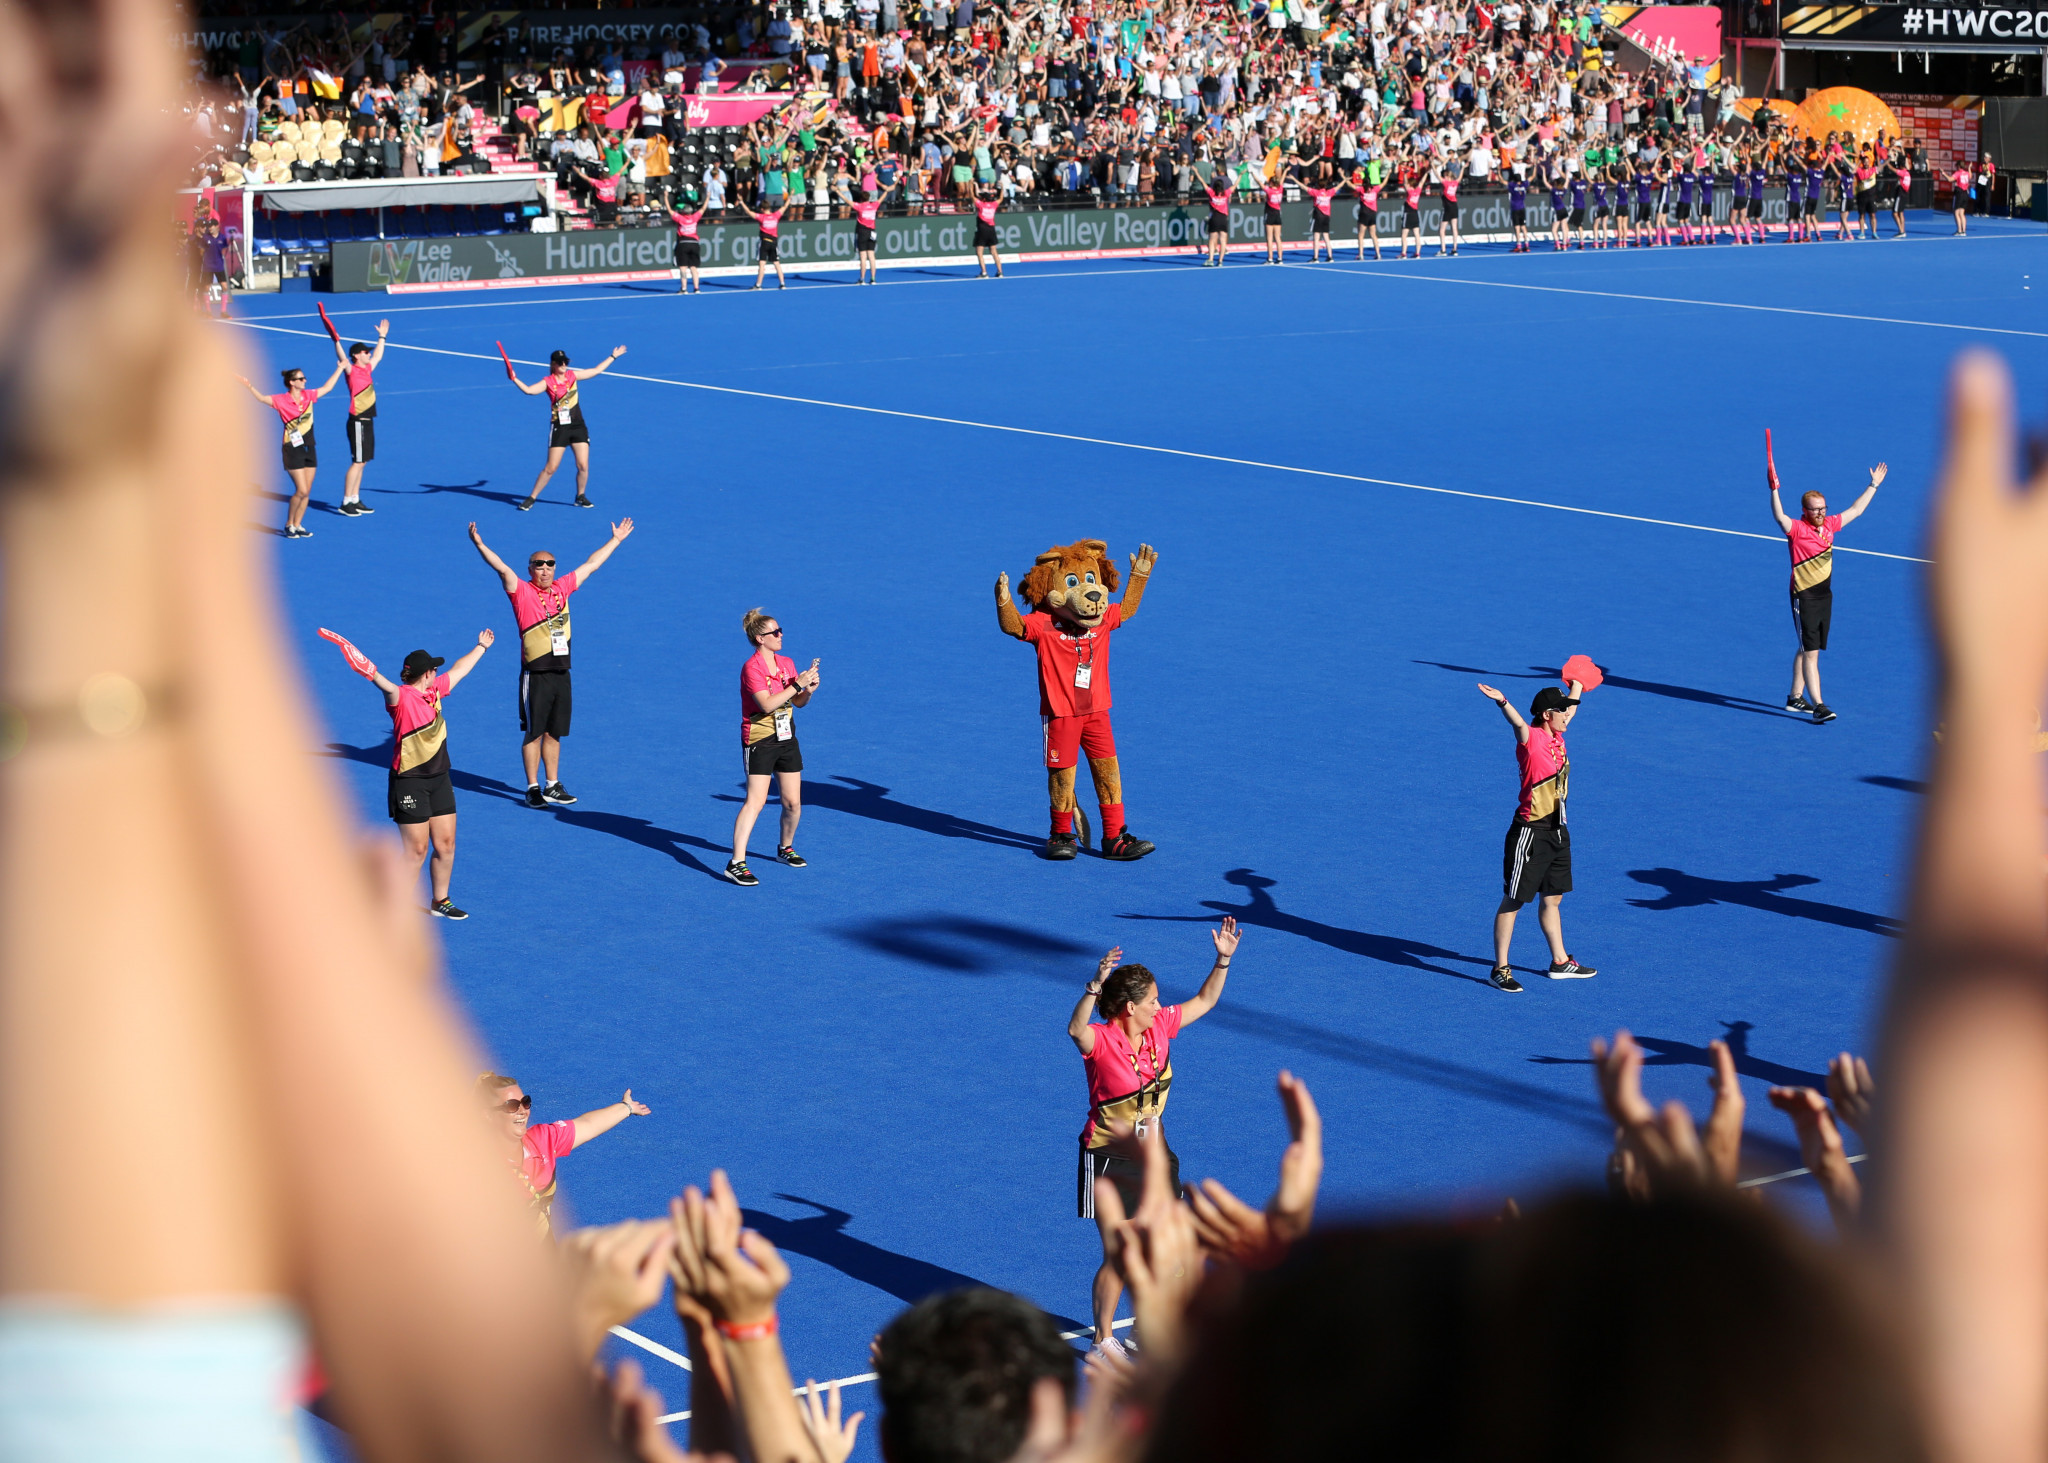 London hosted the 2018 Women's Hockey World Cup ©Getty Images